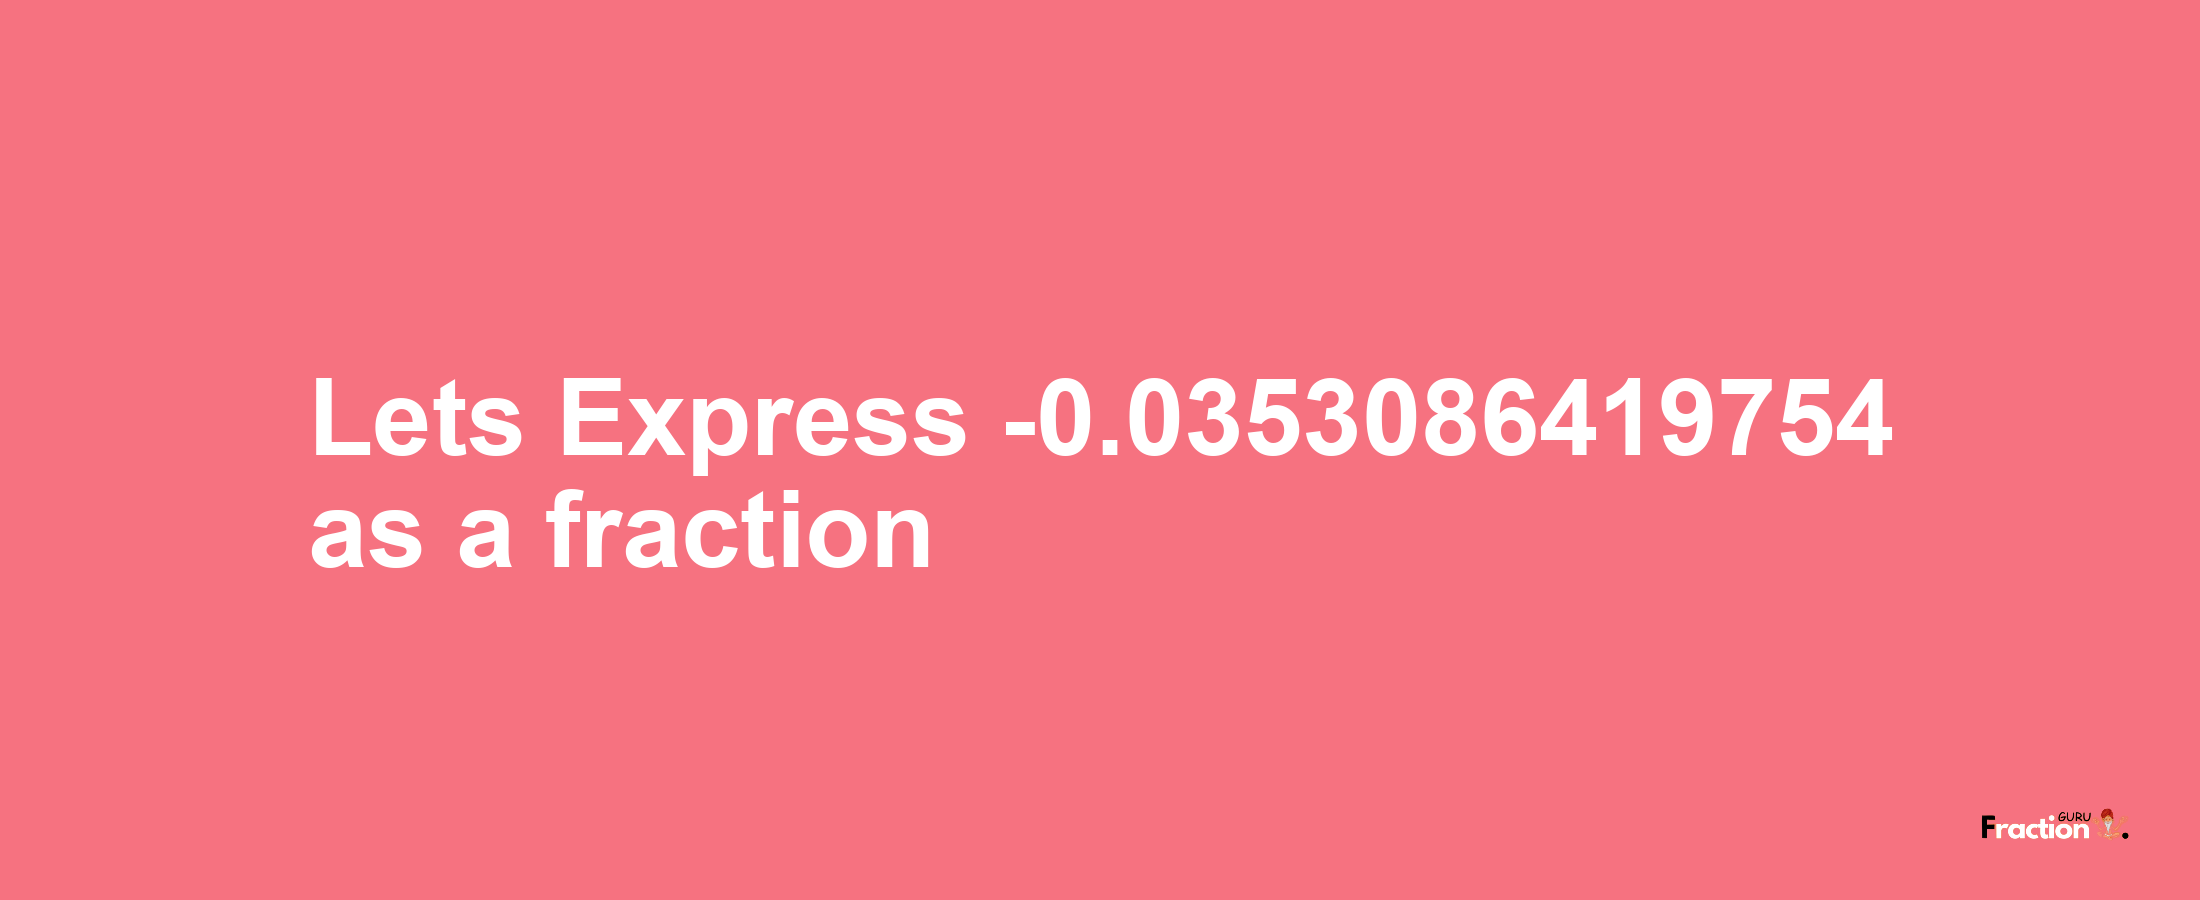 Lets Express -0.0353086419754 as afraction